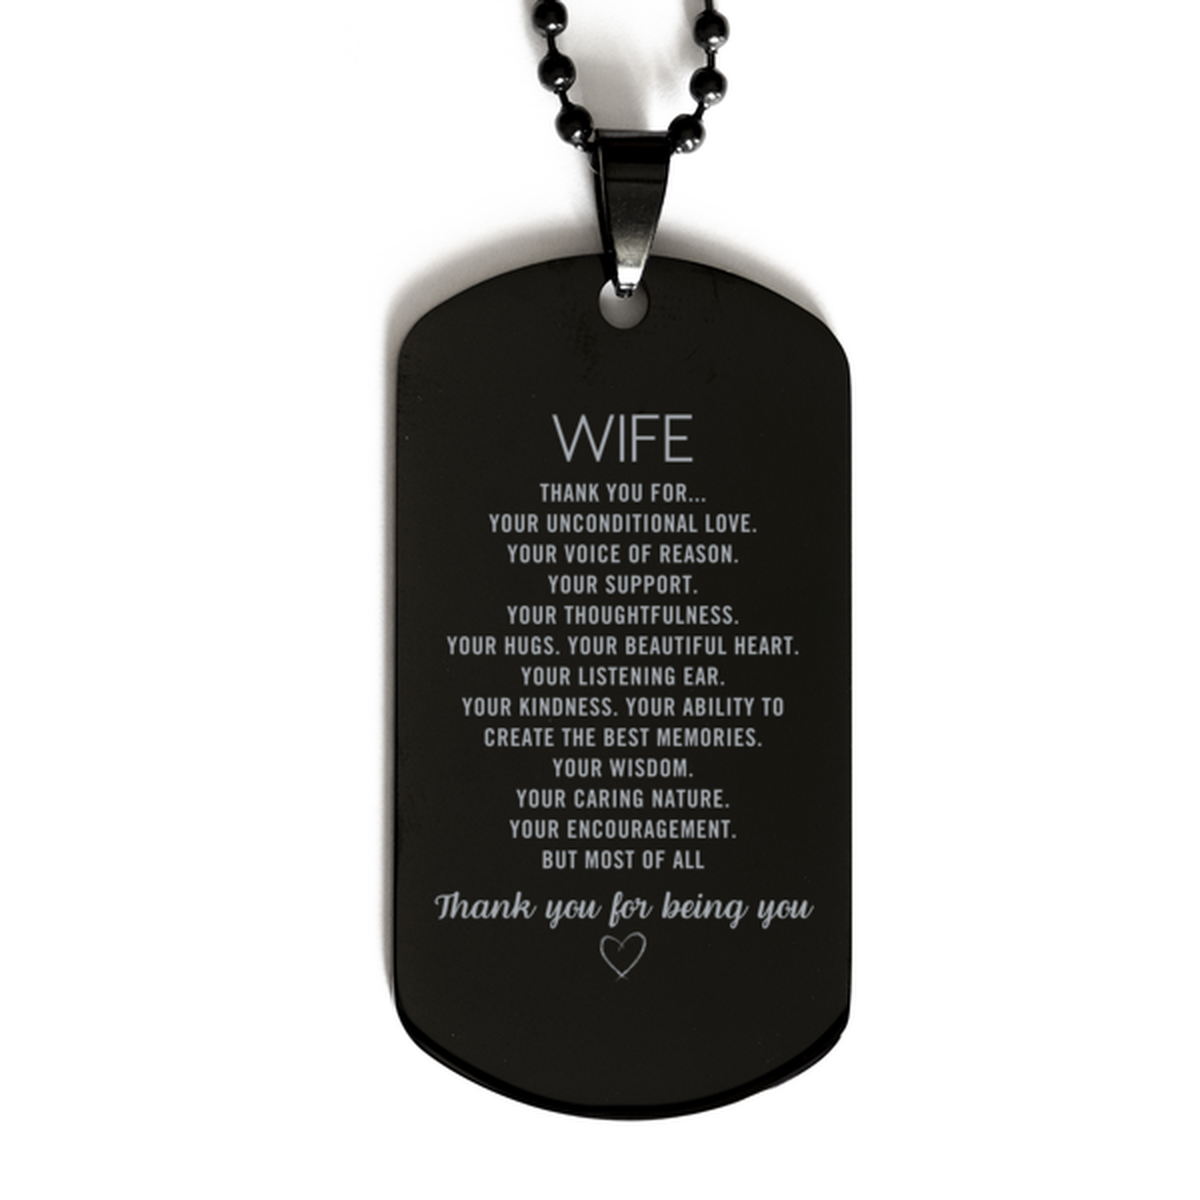 Wife Black Dog Tag Custom, Engraved Gifts For Wife Christmas Graduation Birthday Gifts for Men Women Wife Thank you for Your unconditional love